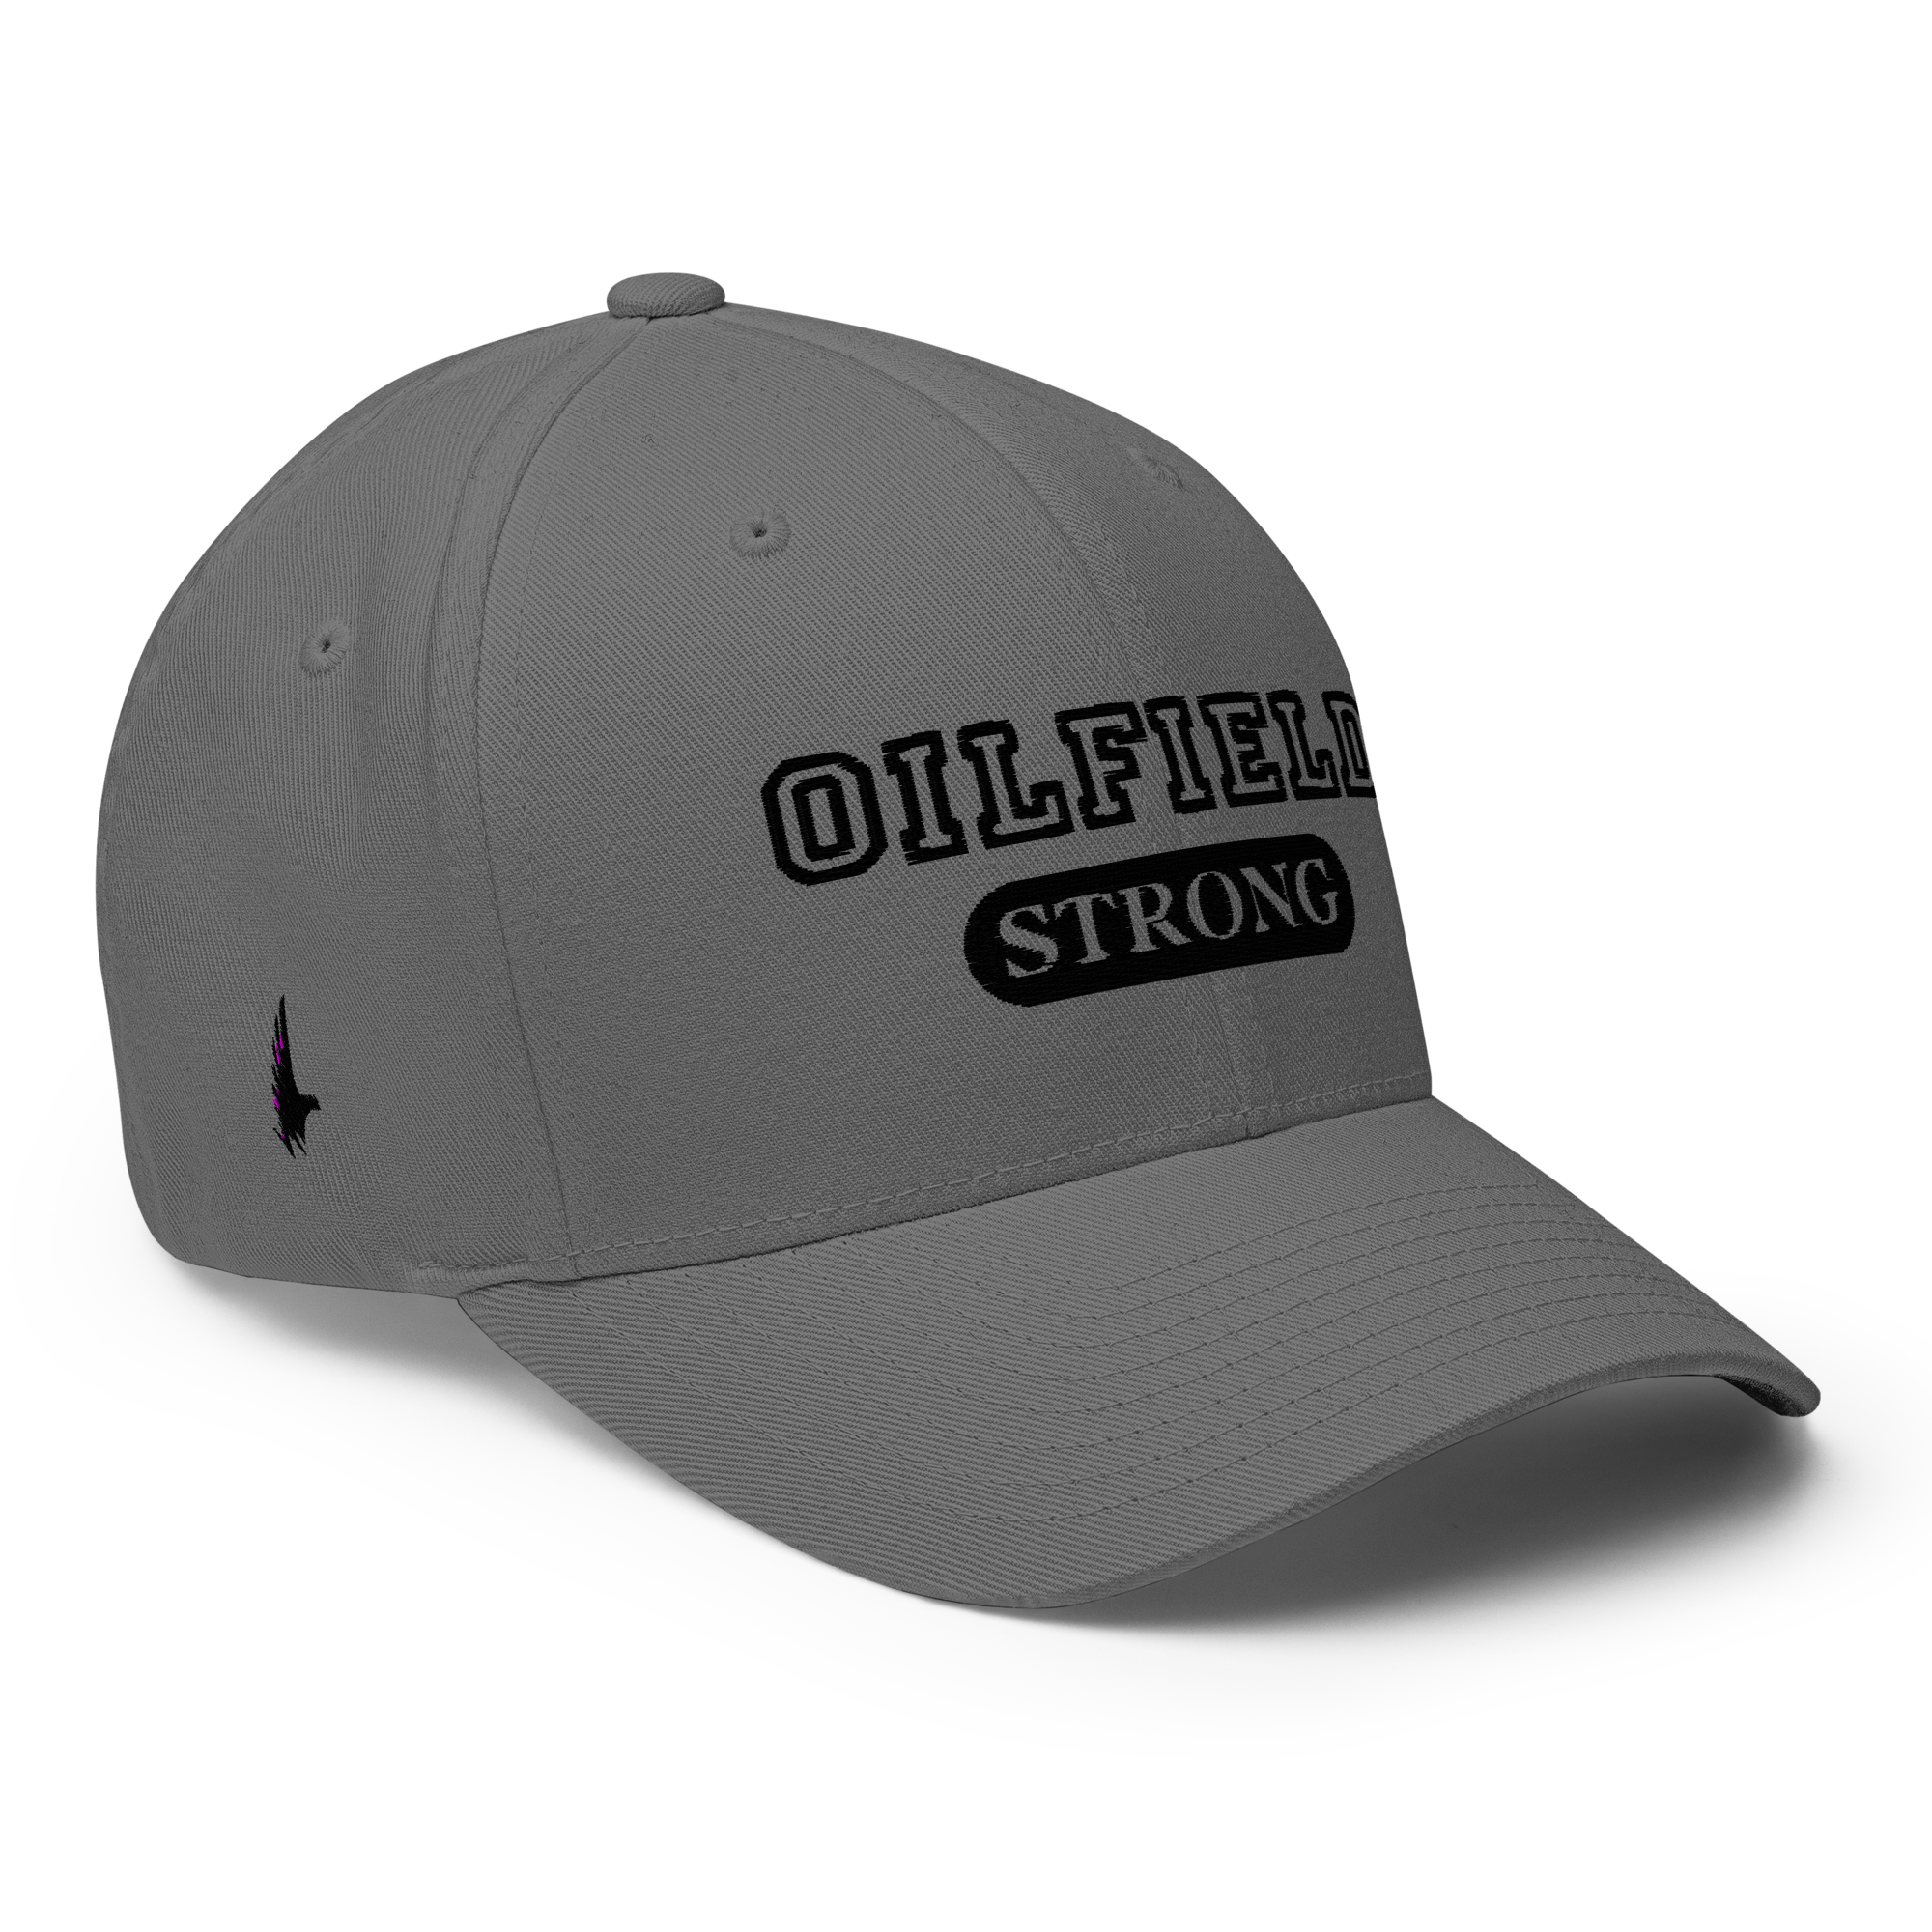 Oilfield Strong Fitted Hat Grey Black - Loyalty Vibes